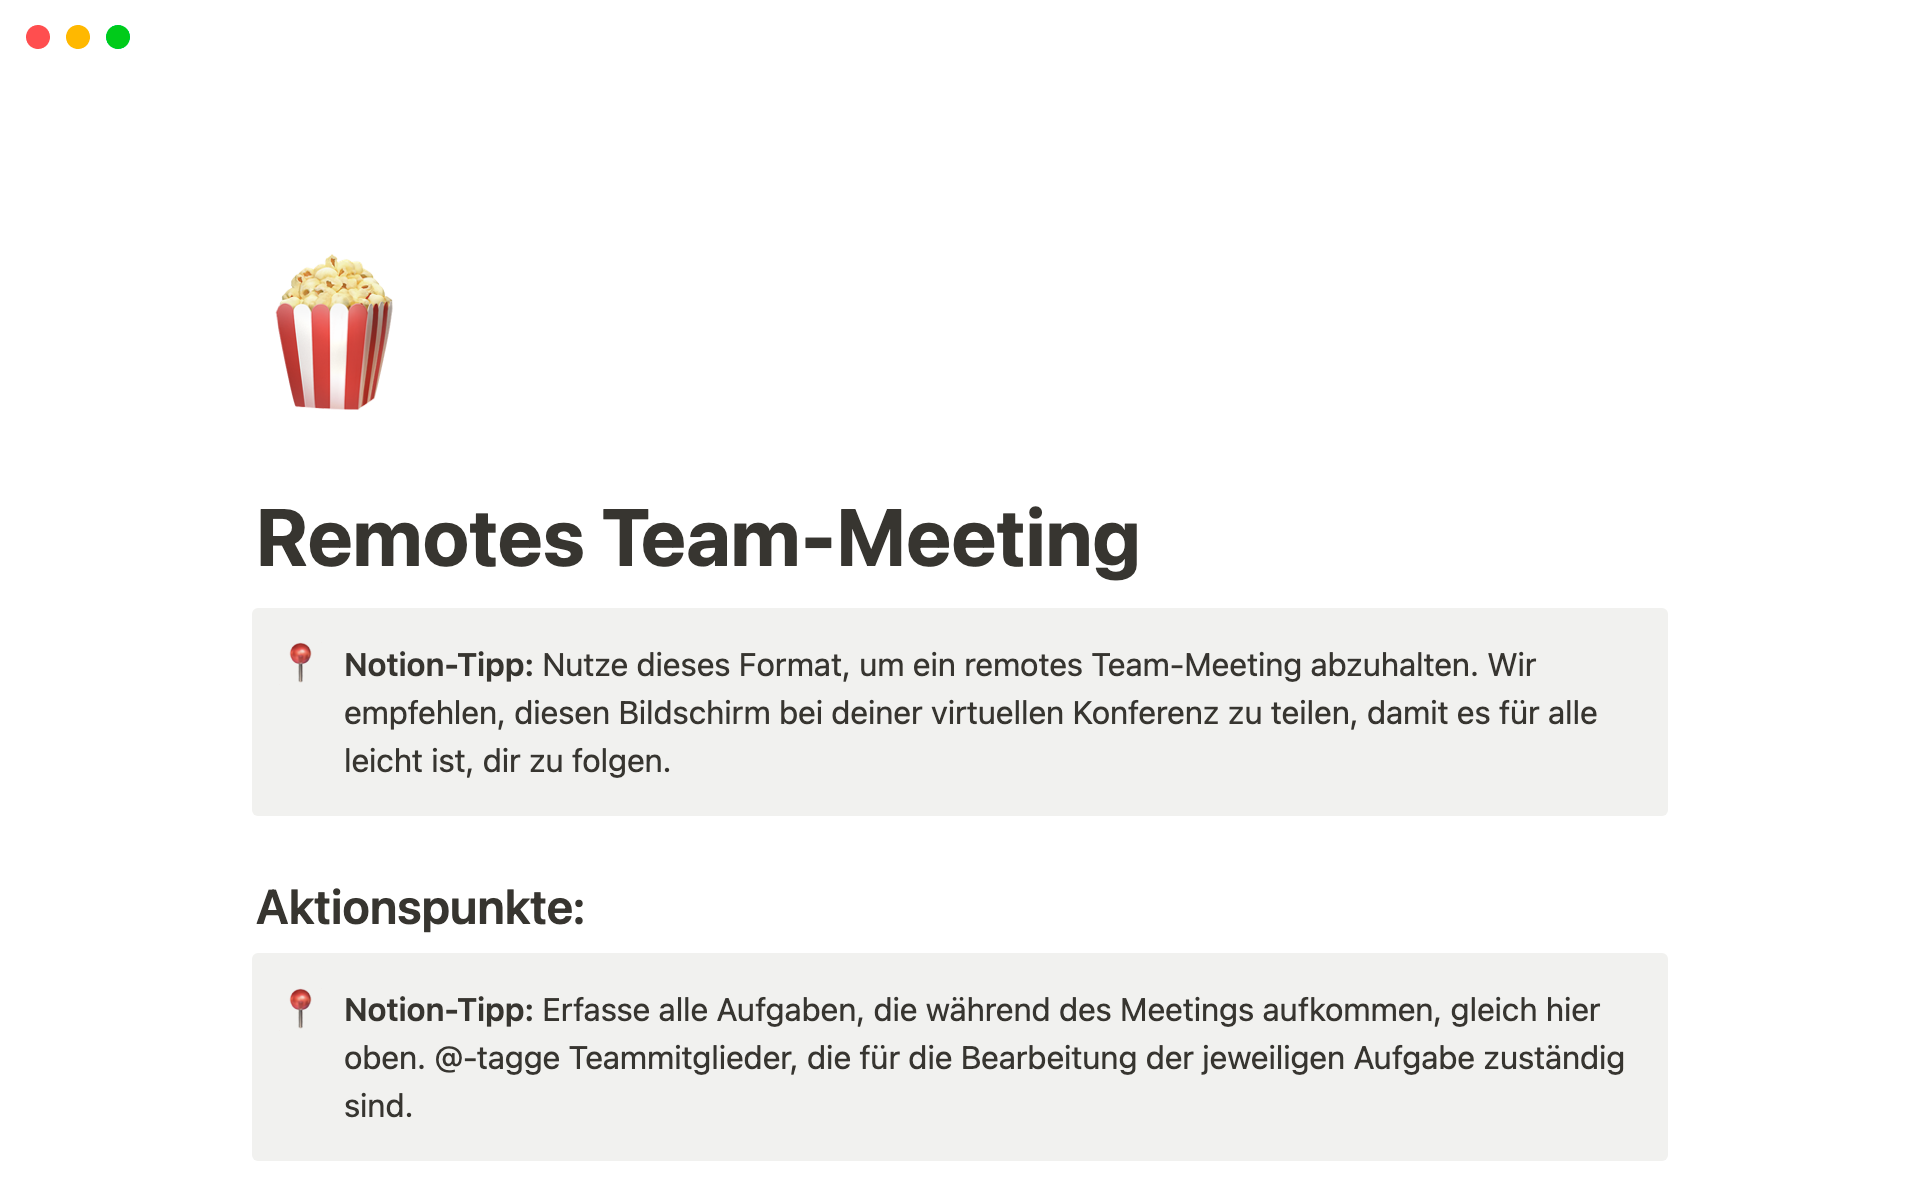  The desktop image for the Nonprofit remote team meeting template